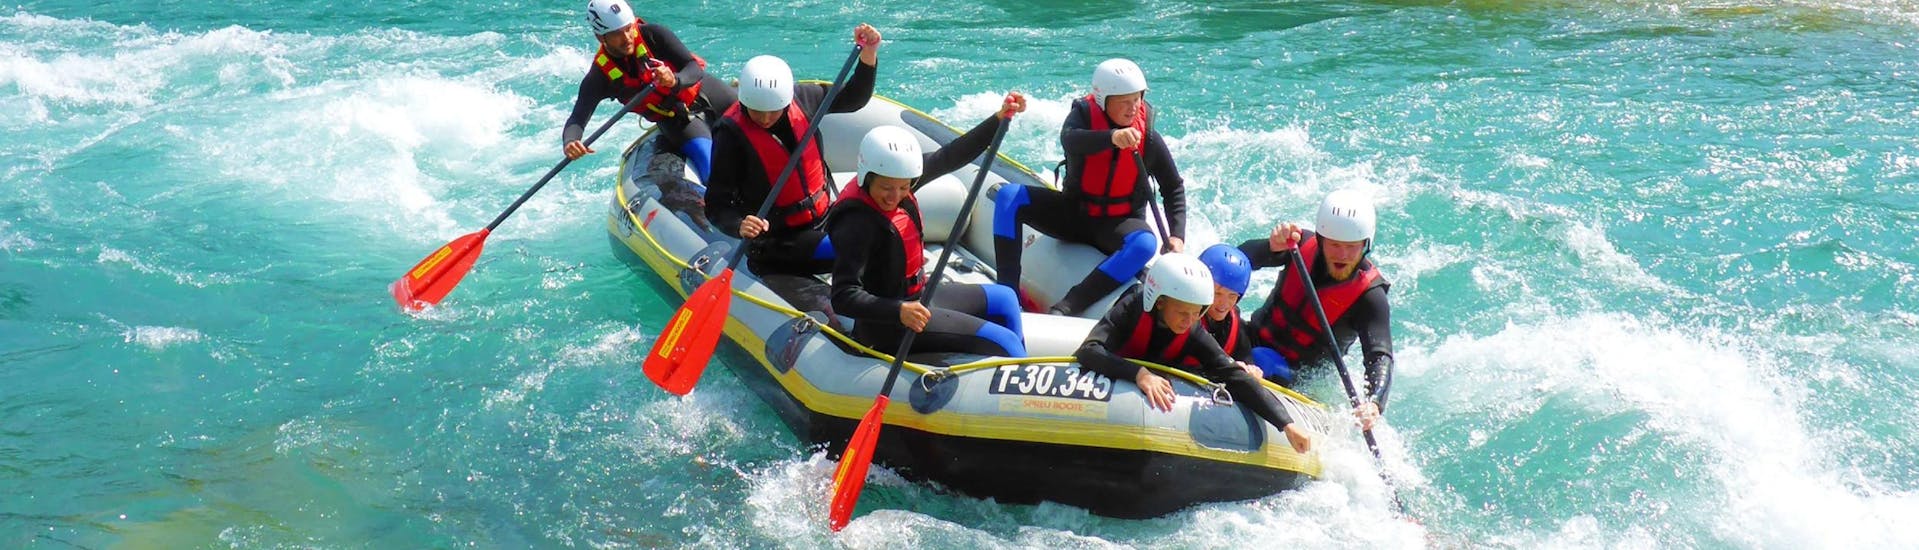 Rafting & Canyoning Family Package im Zillertal.